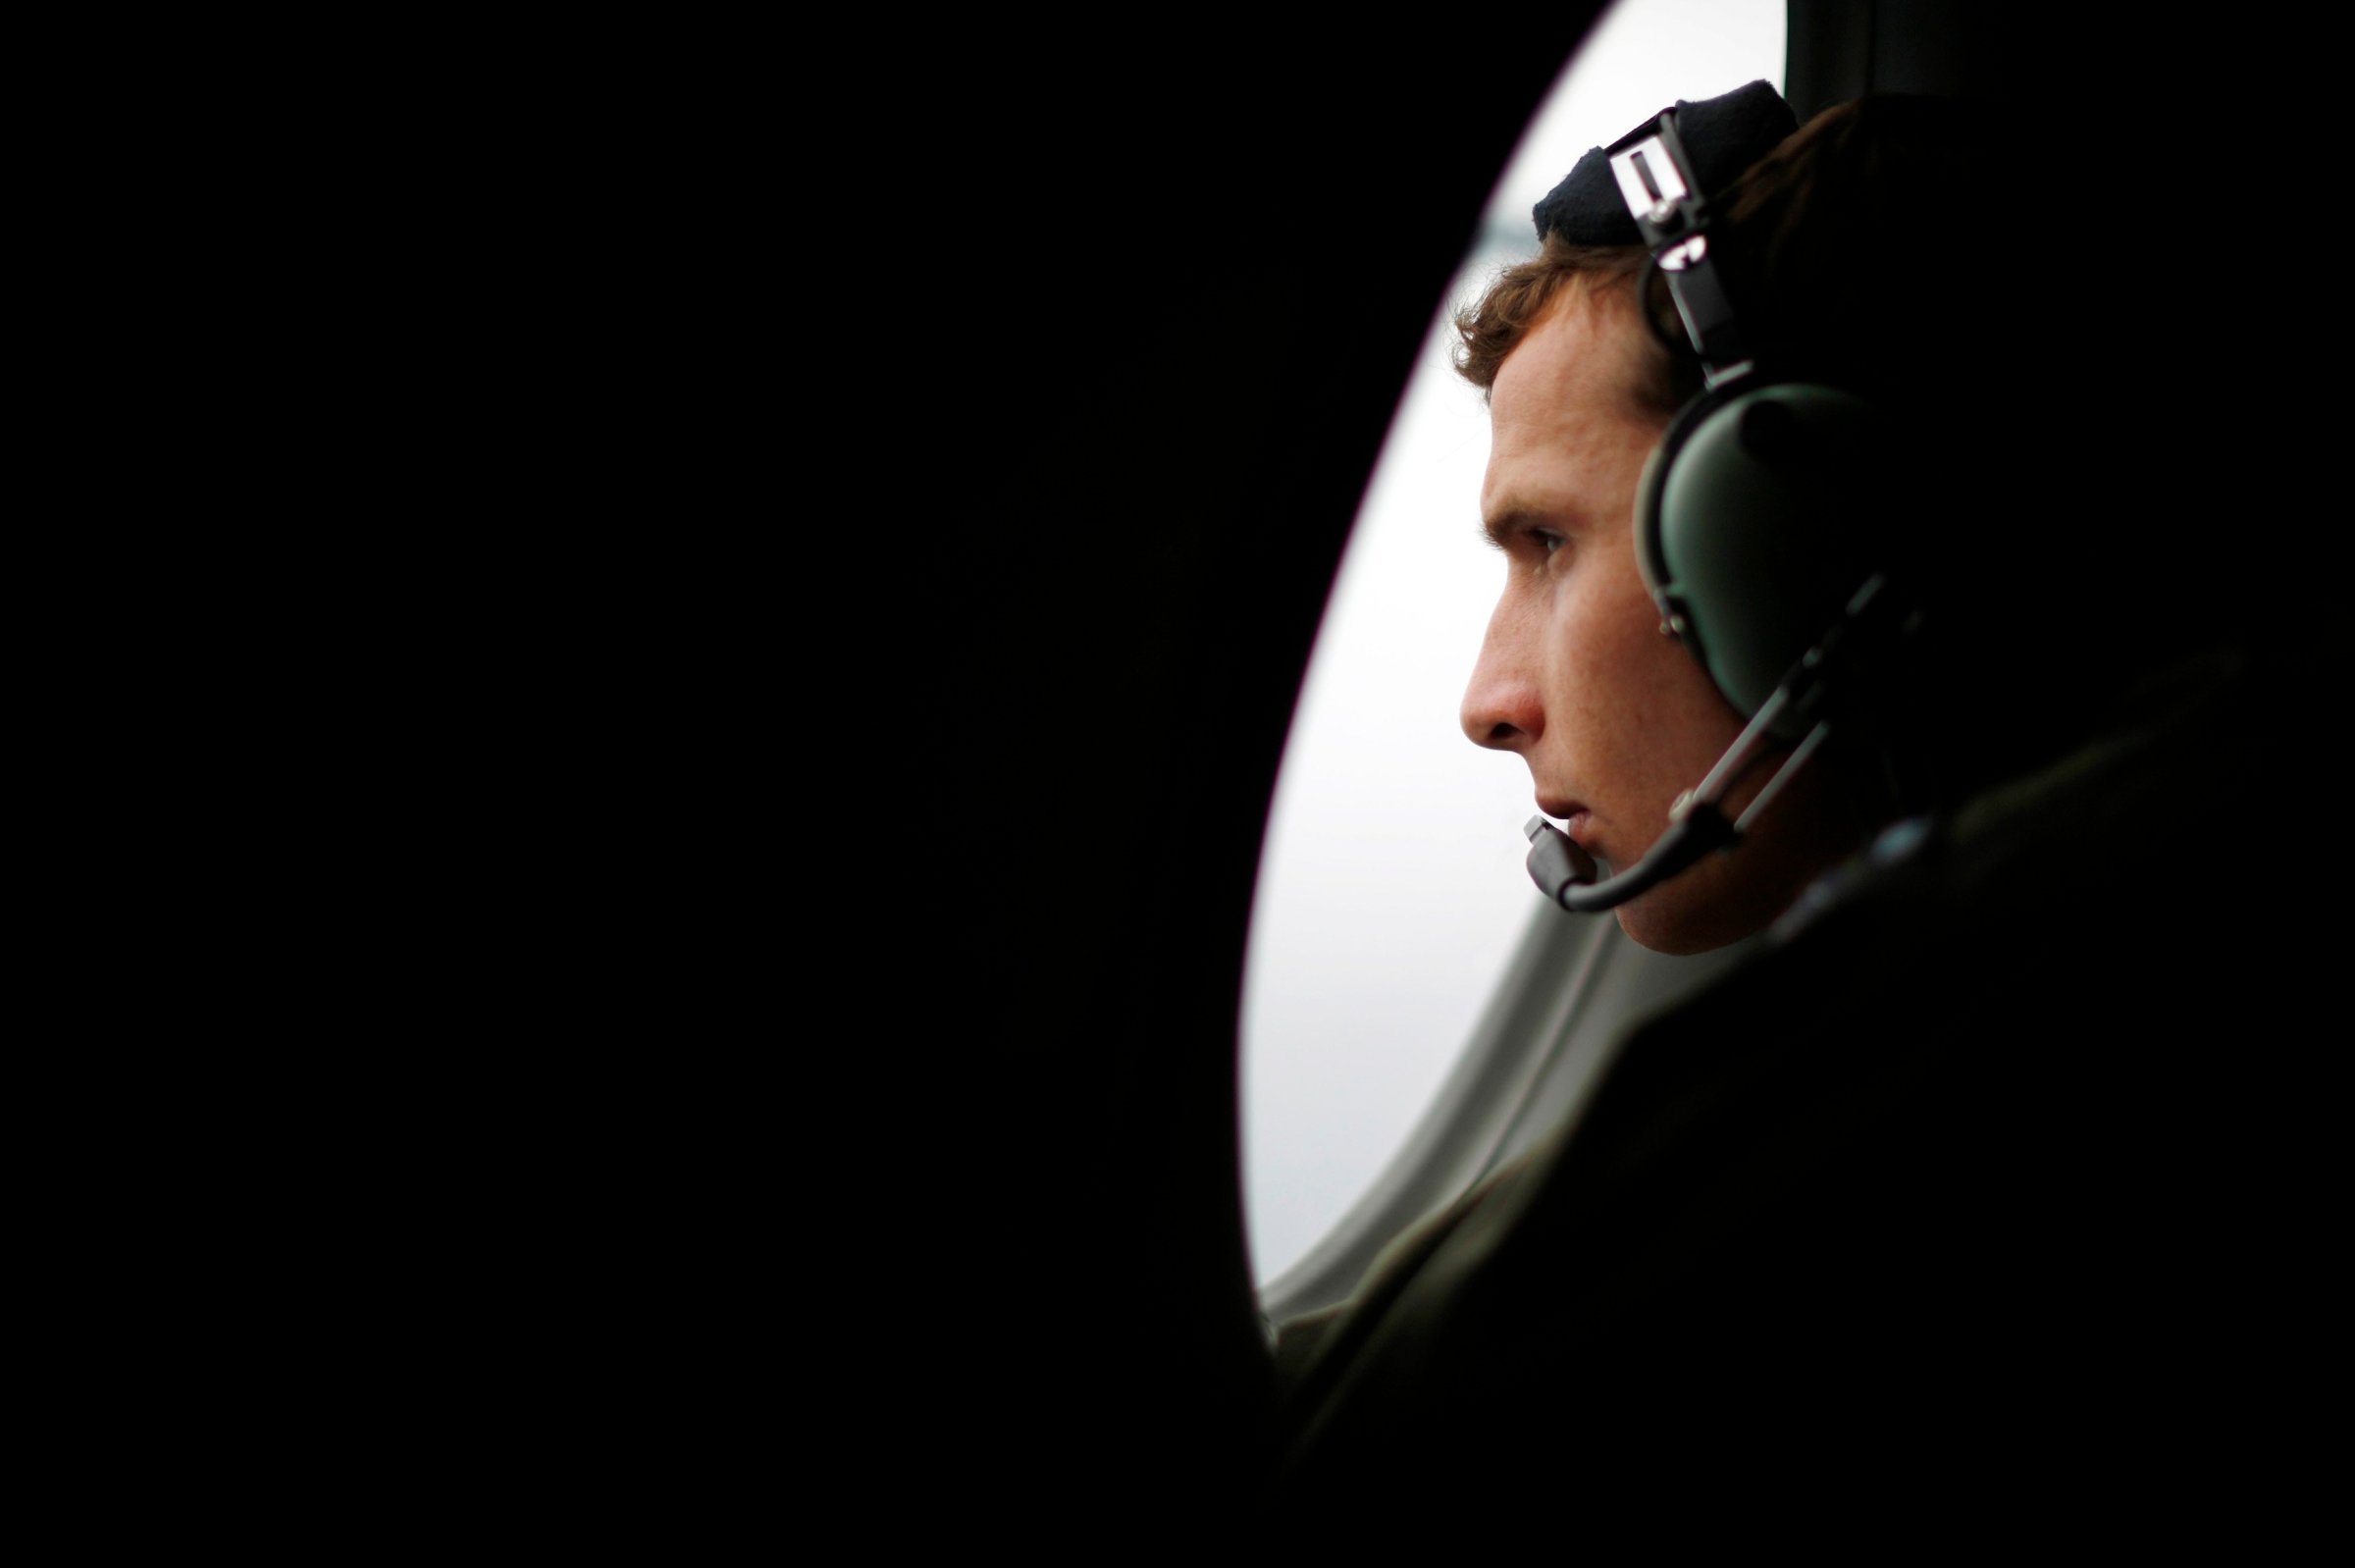 A crew member aboard a Royal New Zealand Air Force P-3K2 Orion aircraft searches for missing Malaysian Airlines flight MH370 over the southern Indian Ocean